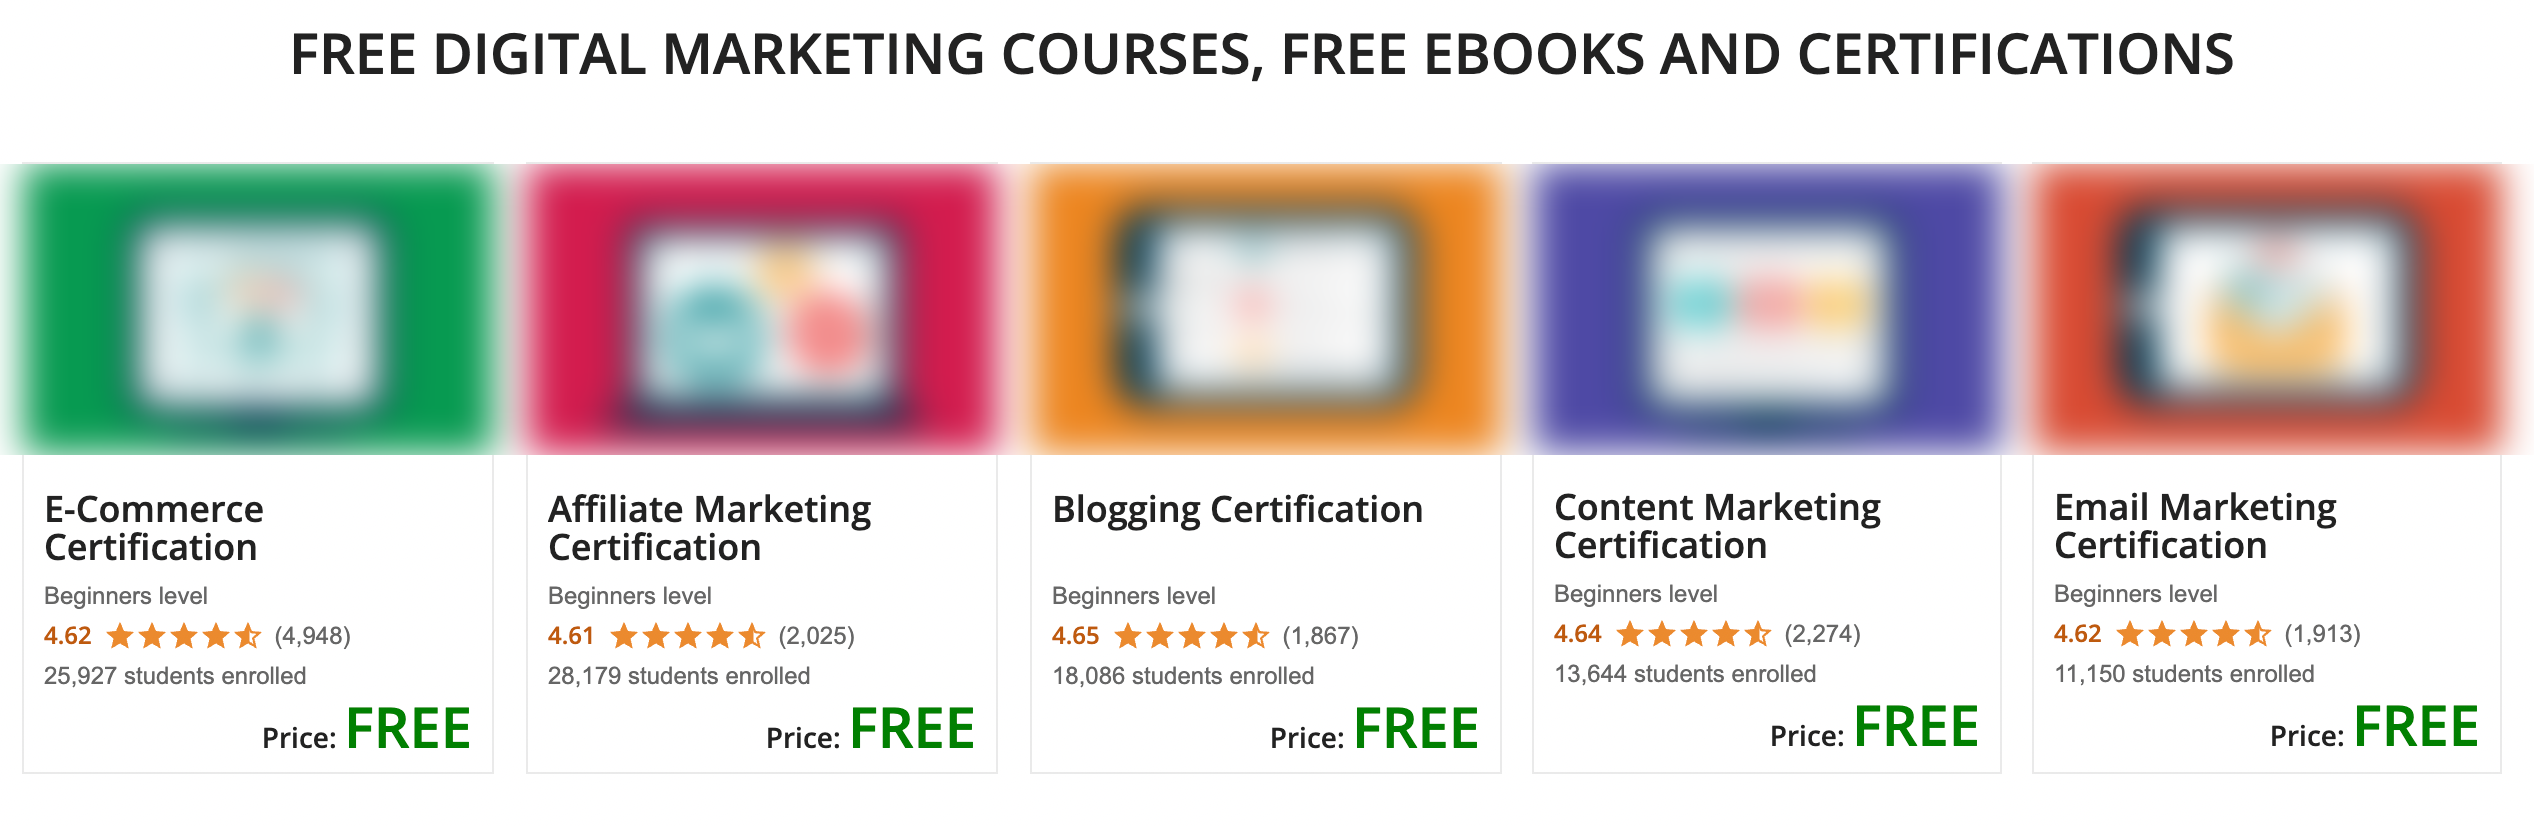 Free courses from EMarketing Institute.